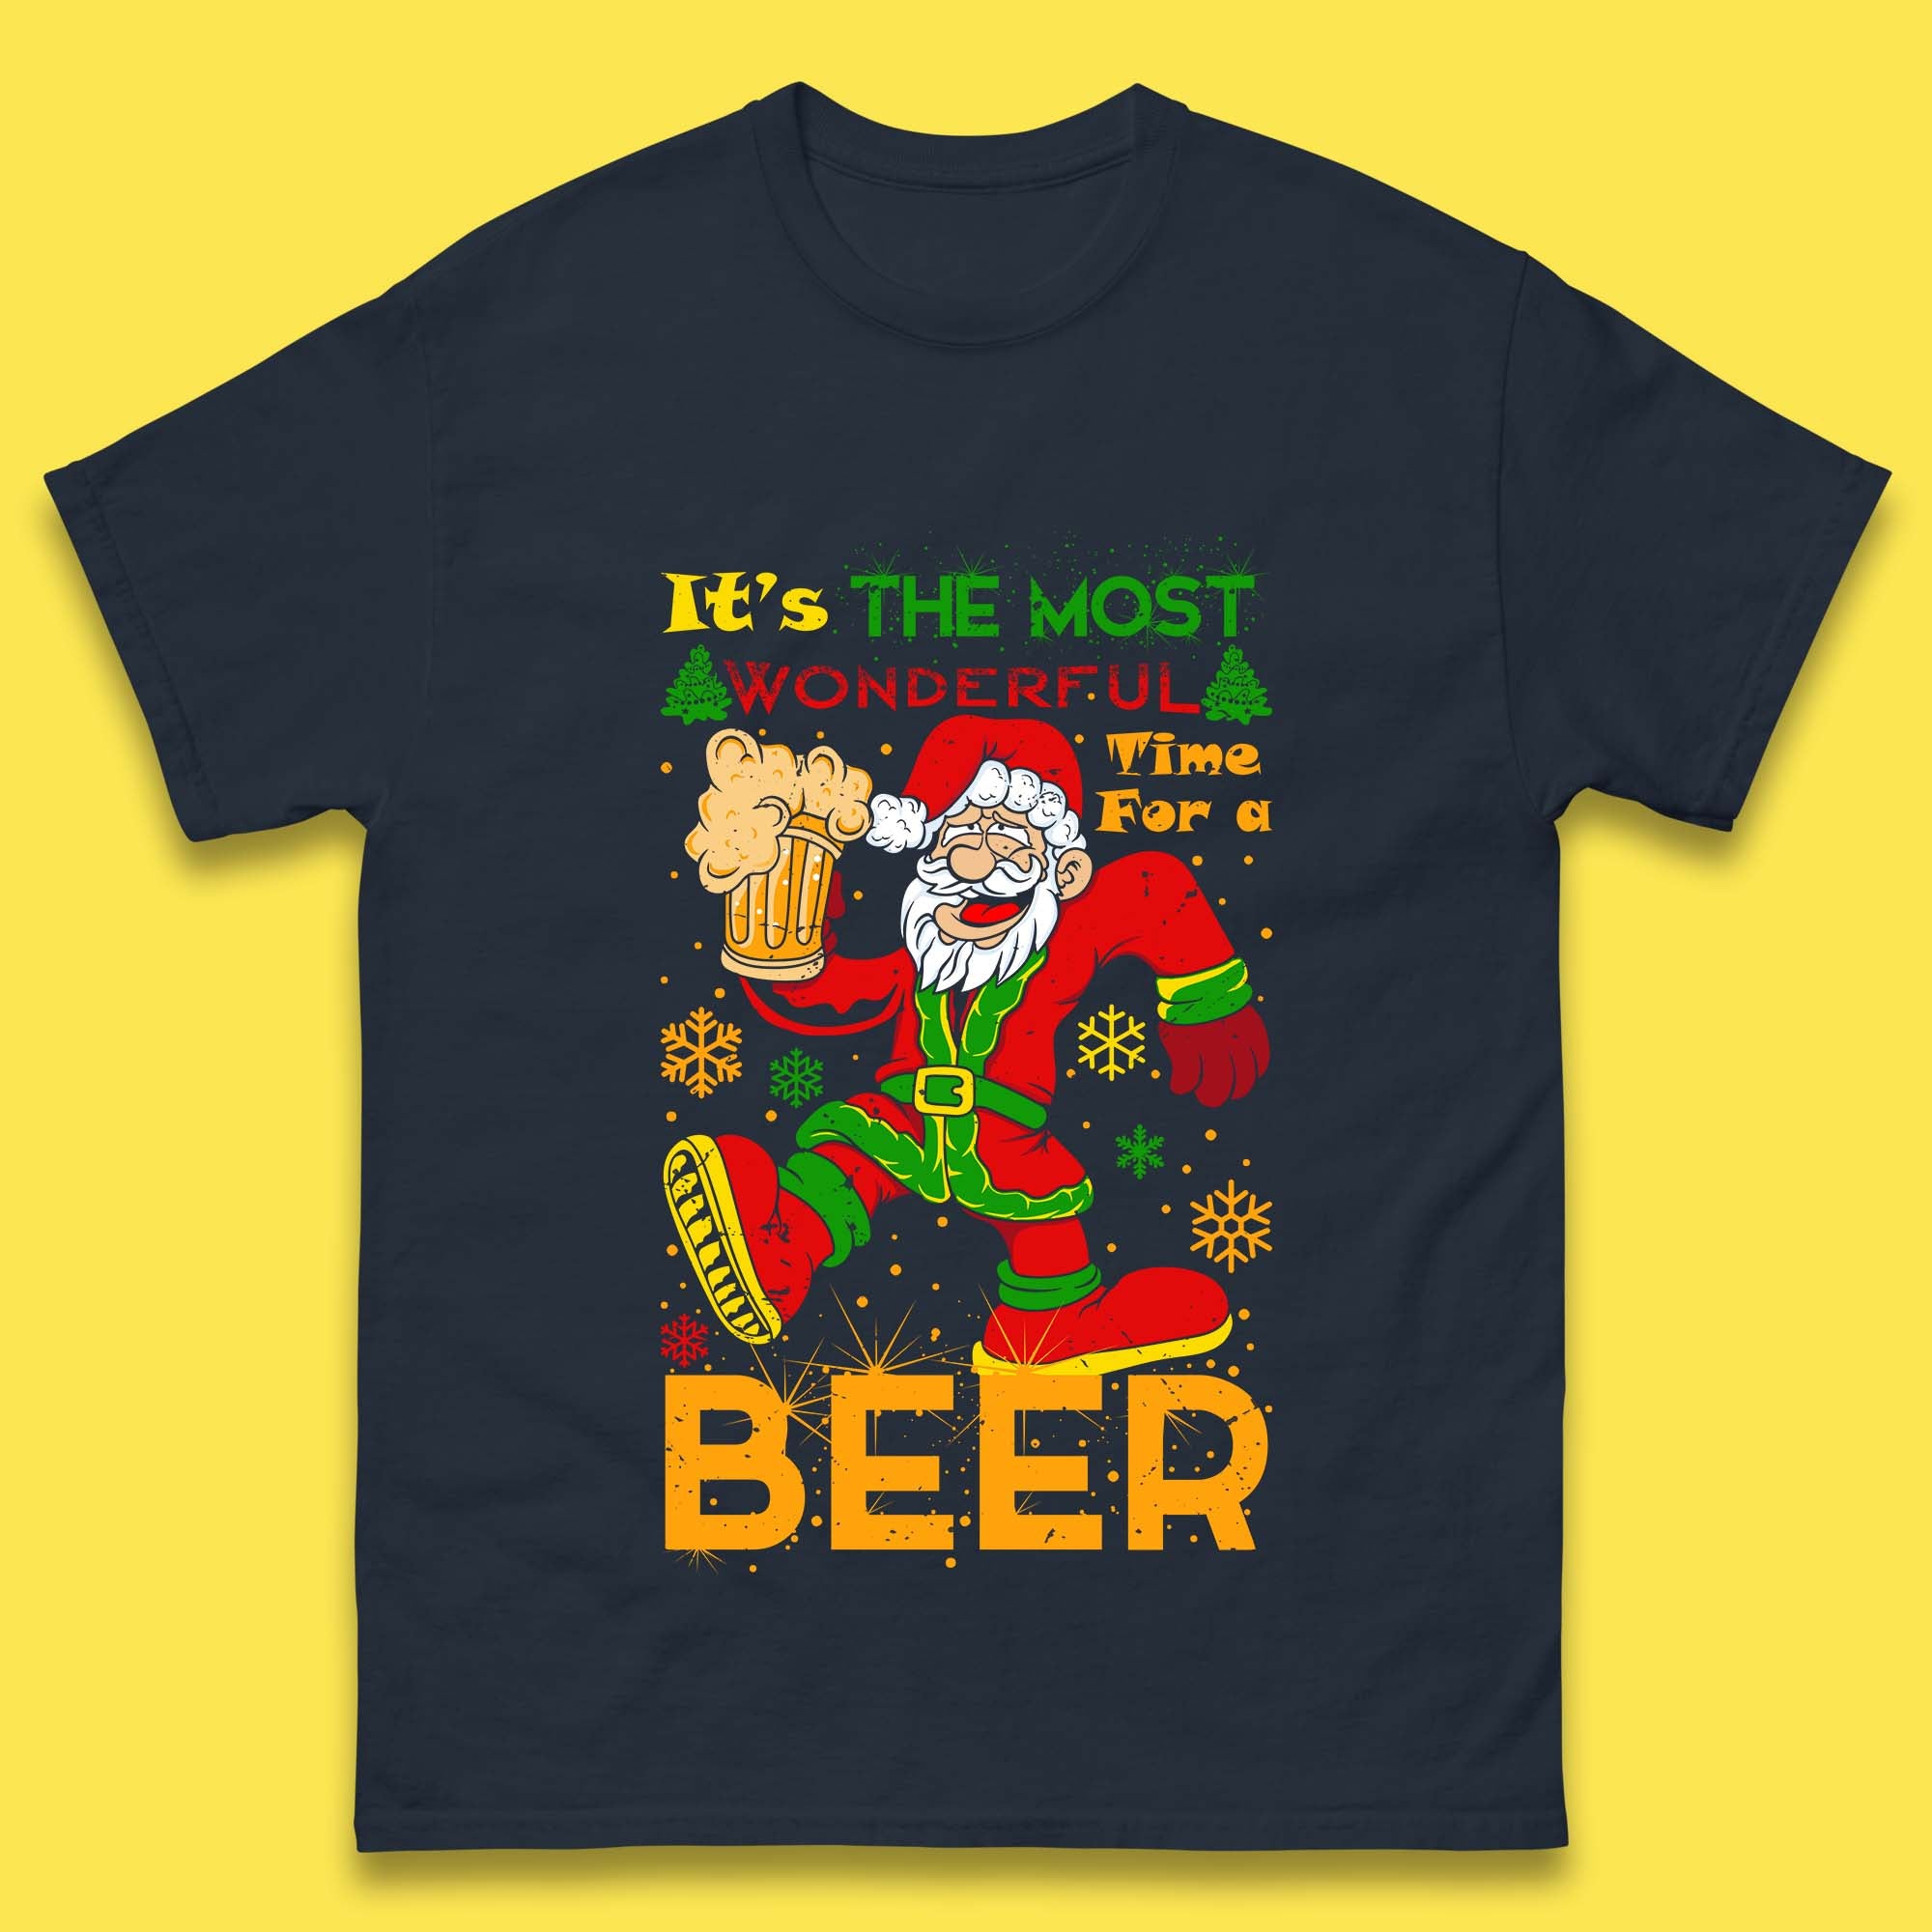 Most Wonderful Time for a Beer T-Shirt